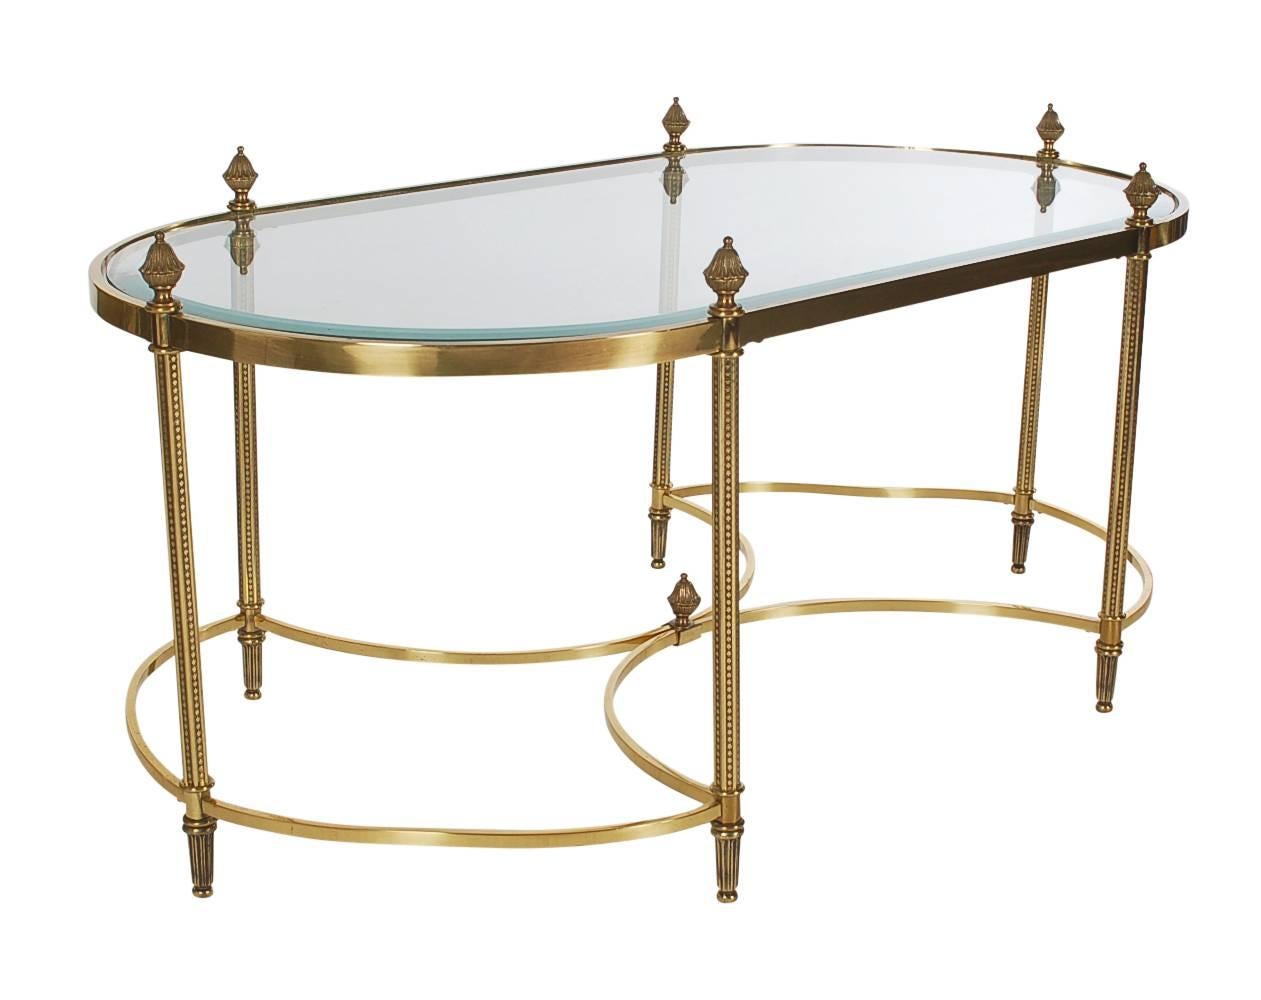 A lovely looking decorative table in the French style after Maison Jansen. It features a brushed brass frame, inlaid glass and finial designs.